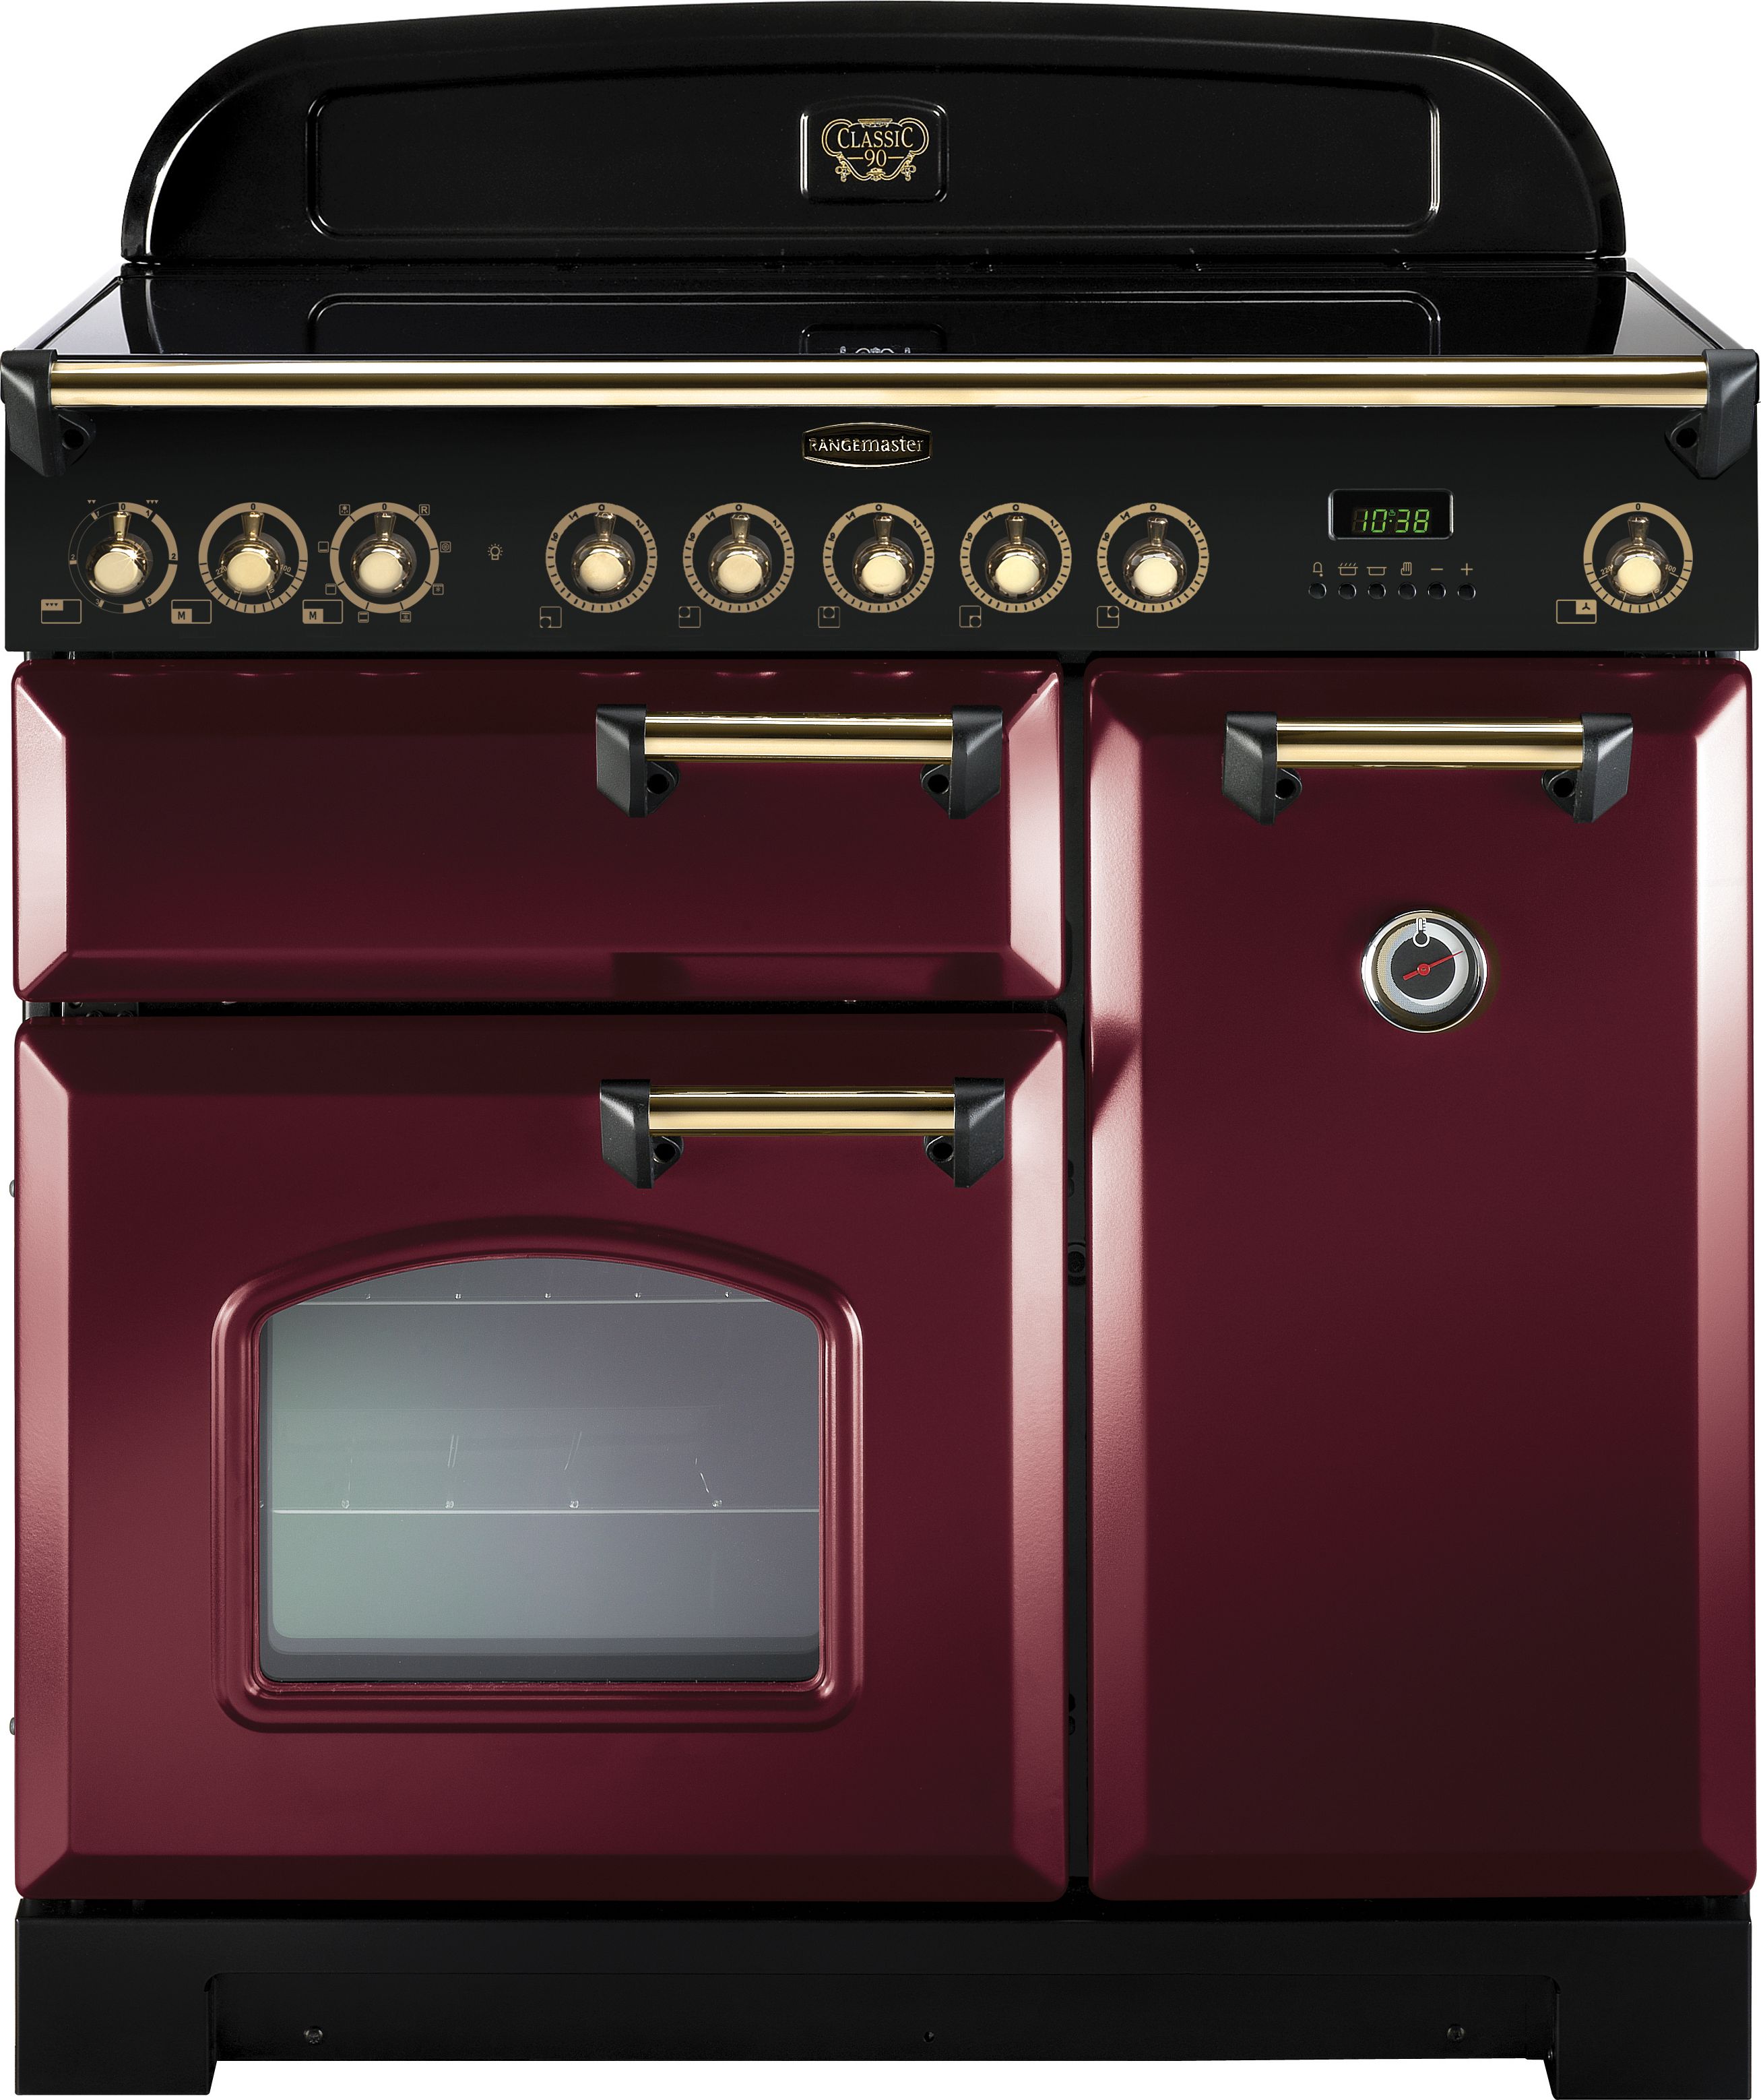 Rangemaster Classic Deluxe CDL90EICY/C 90cm Electric Range Cooker with Induction Hob - Cranberry / Chrome - A/A Rated, Red